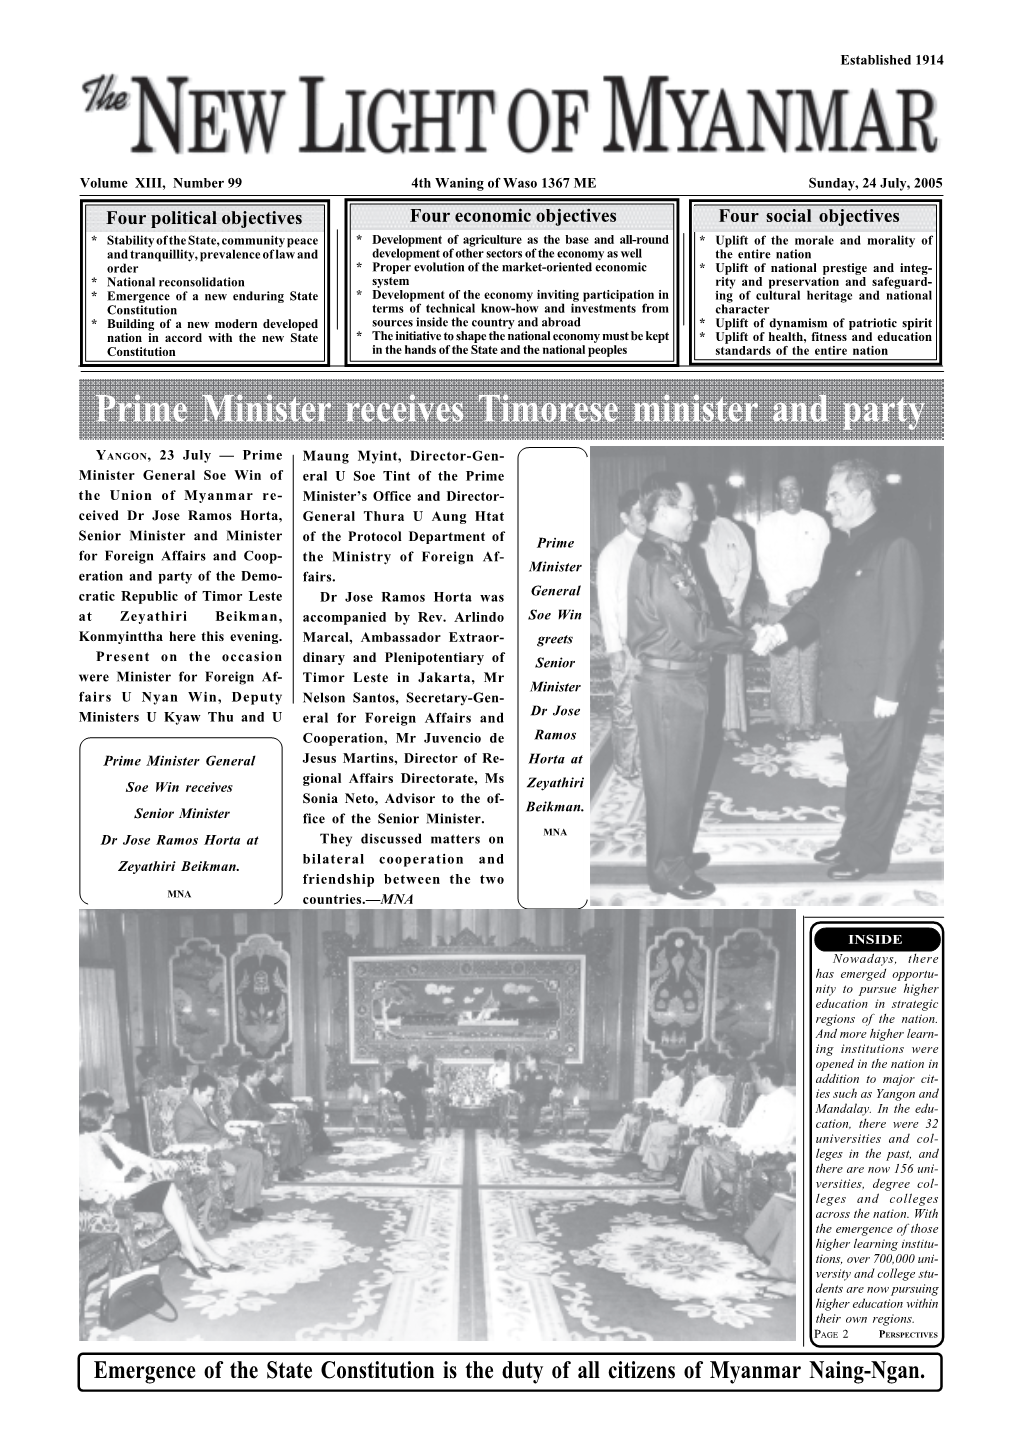 Prime Minister Receives Timorese Minister and Party